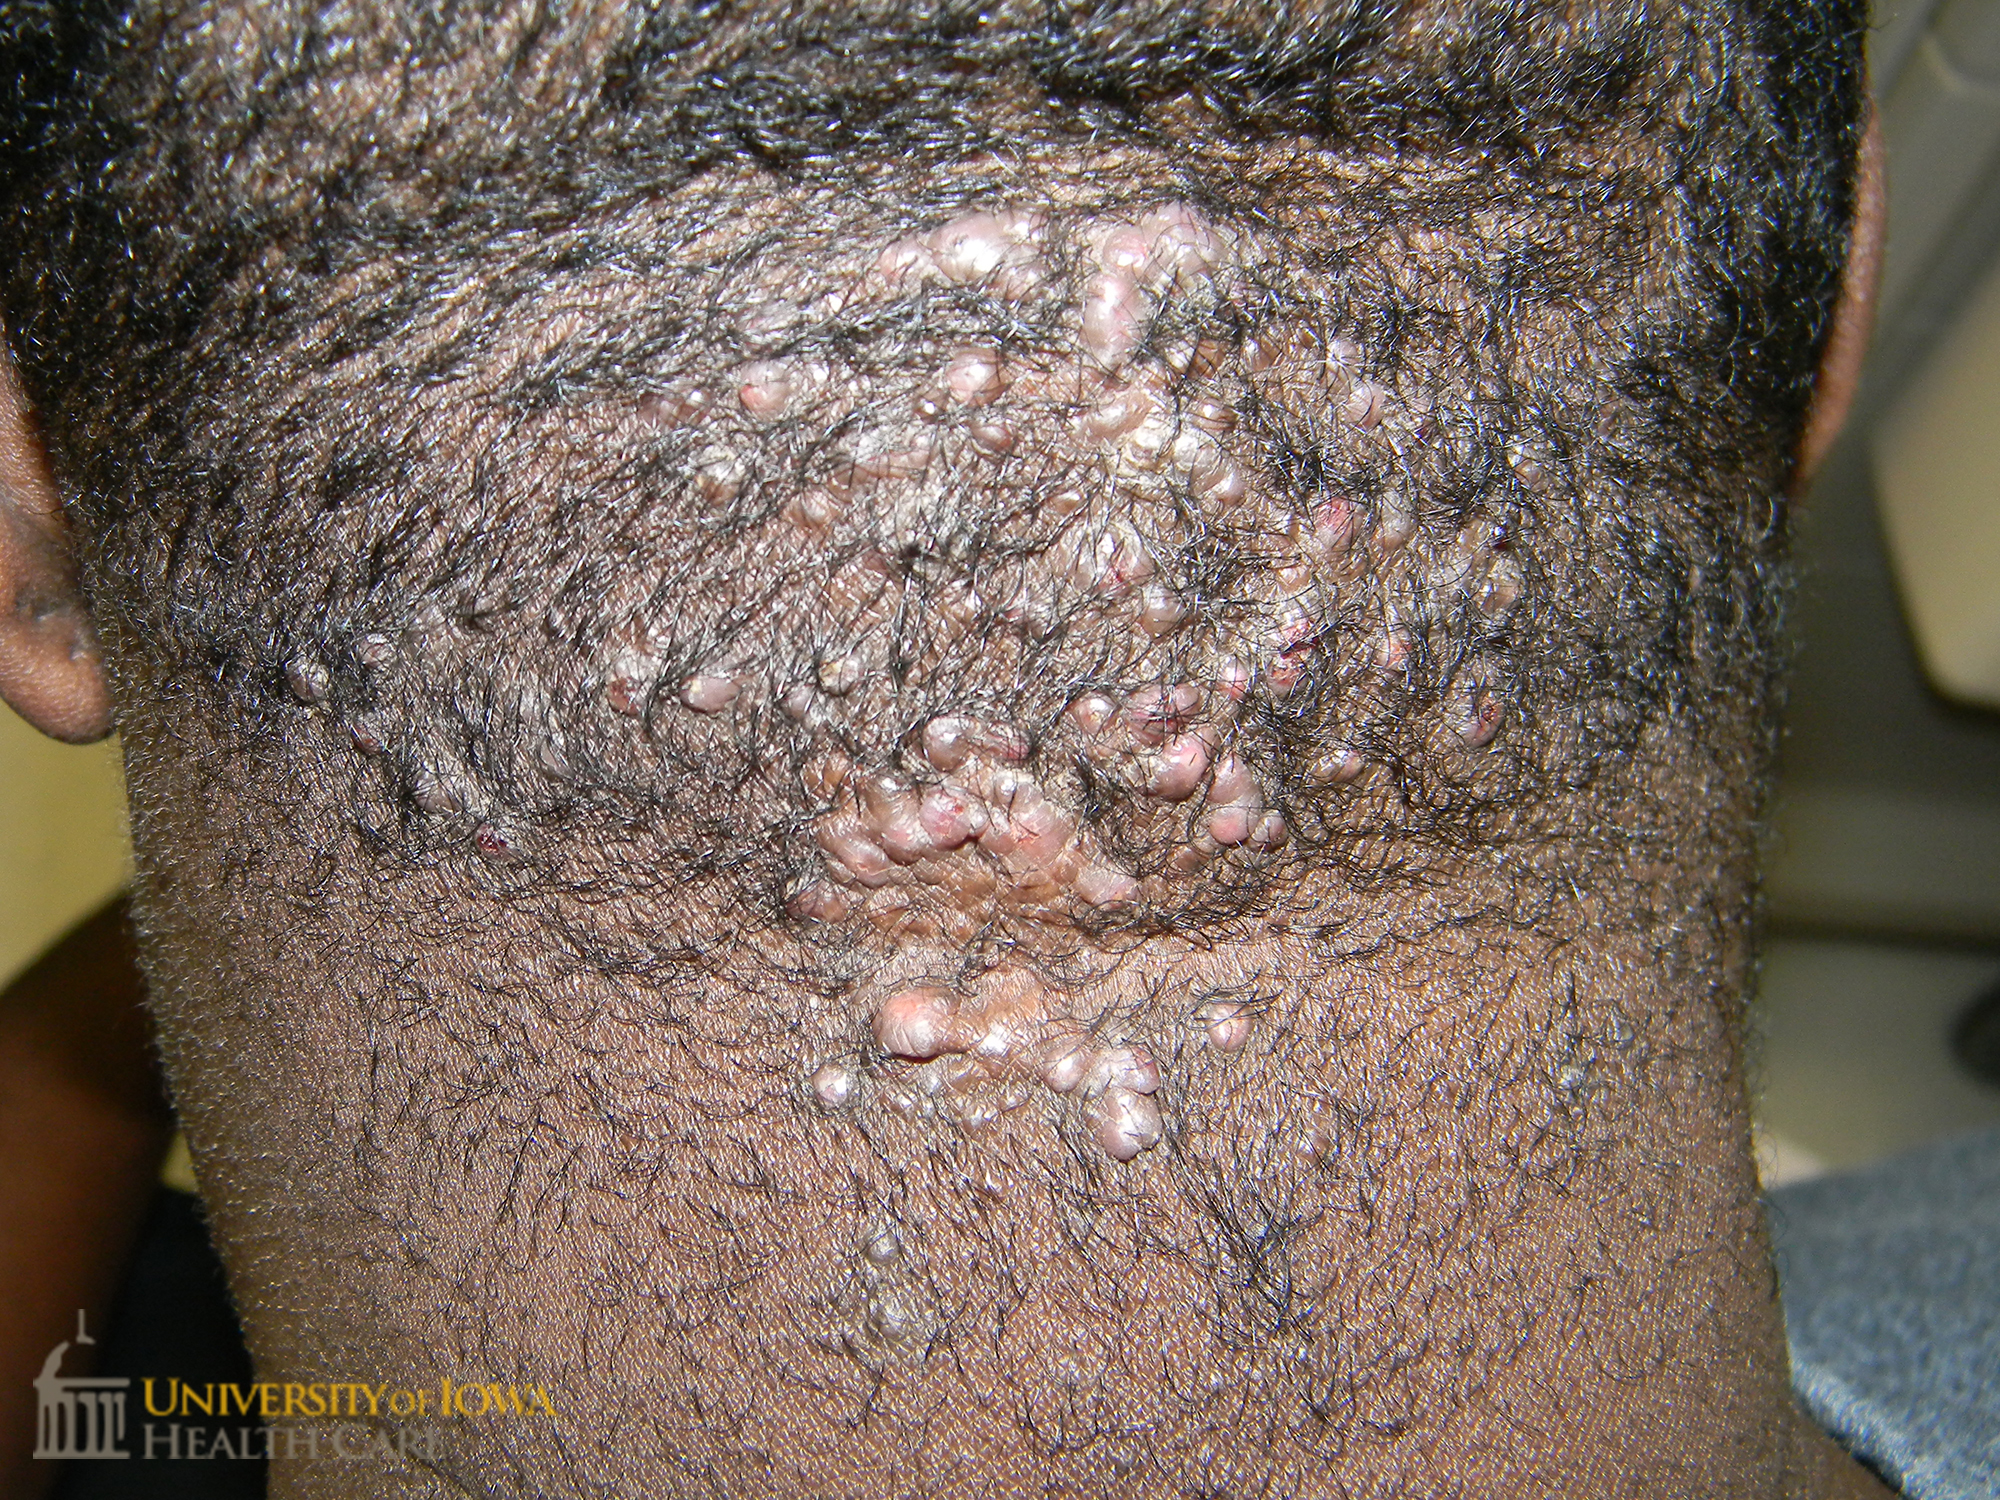 Grouped keloidal papules on the occipital scalp. (click images for higher resolution).